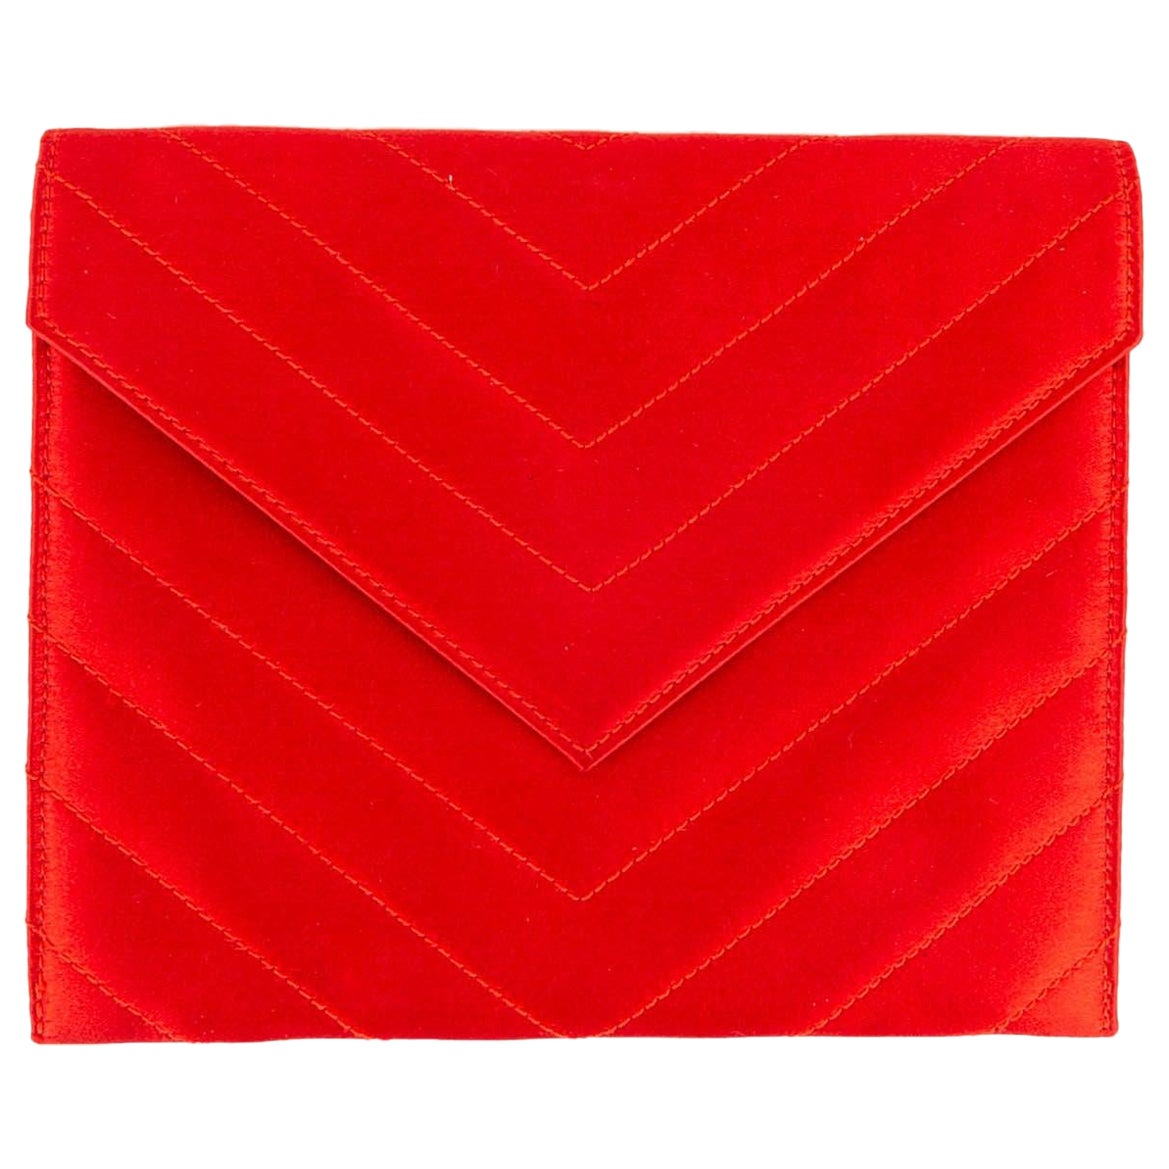 Yves Saint Laurent Quilted Satin Clutch